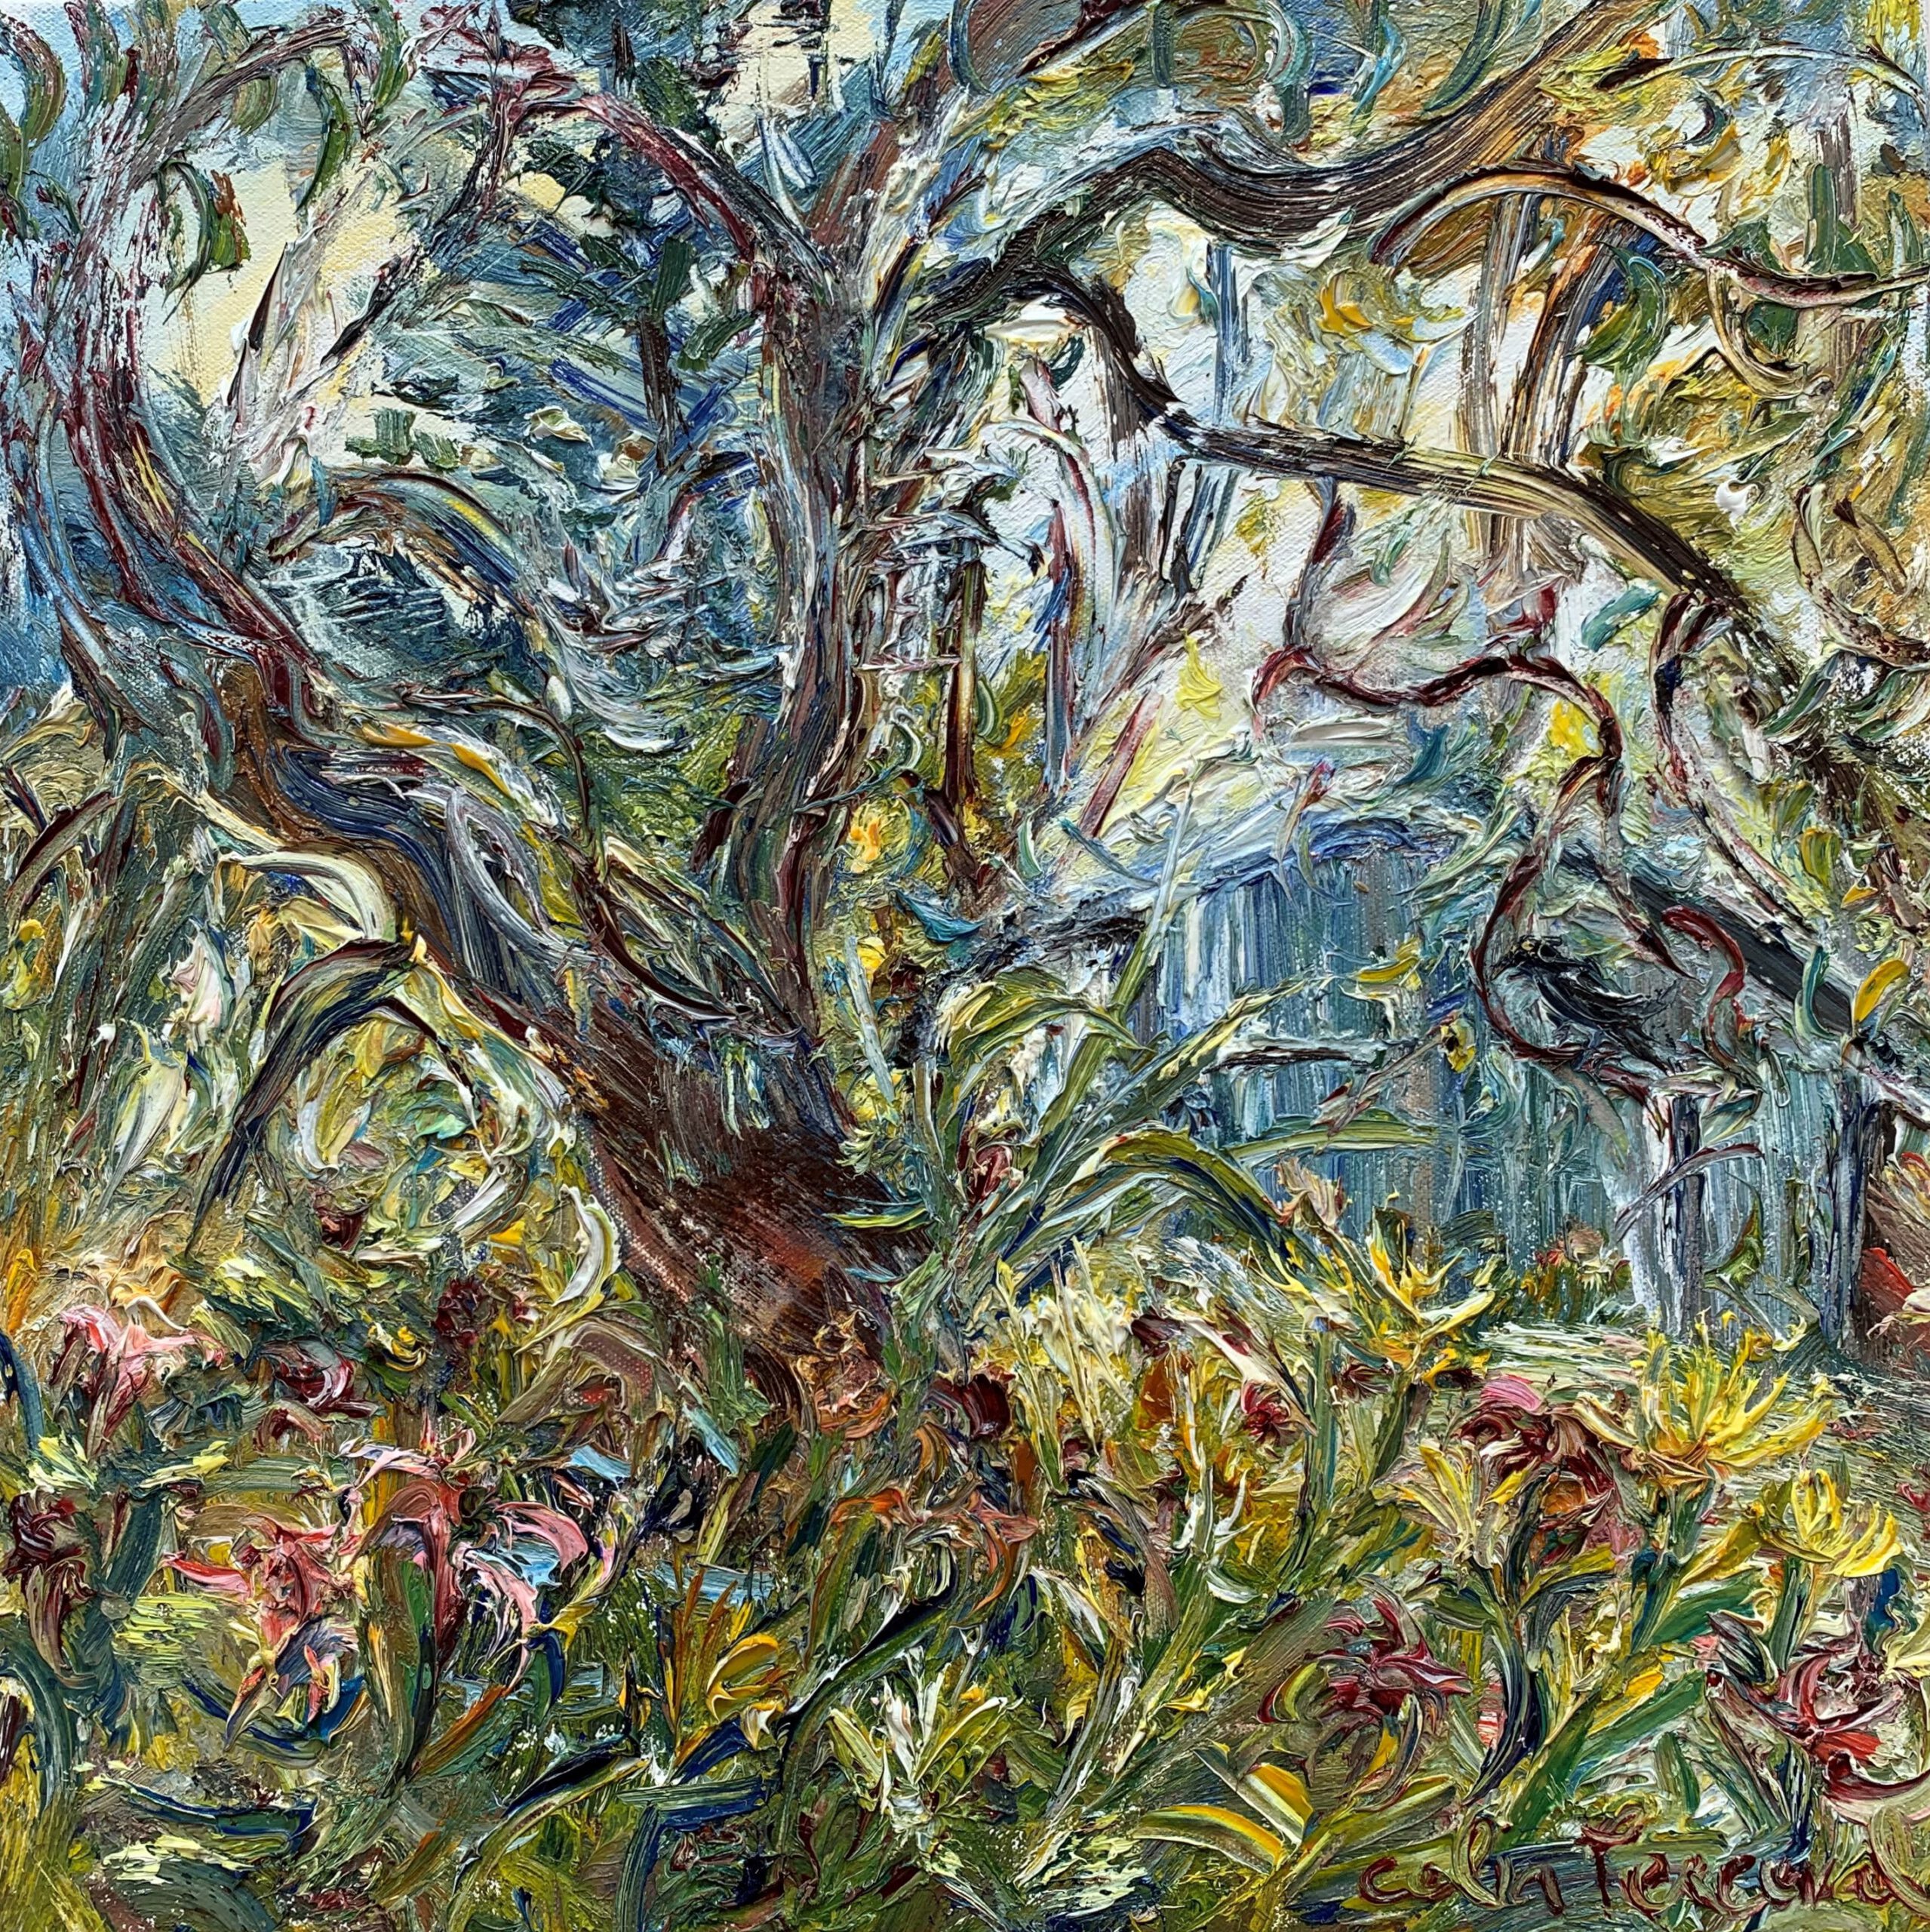 Perceval_Old Tree Over Polly's Shed with Flowers and Crow_oil on canvas_40 x 40cm (2)